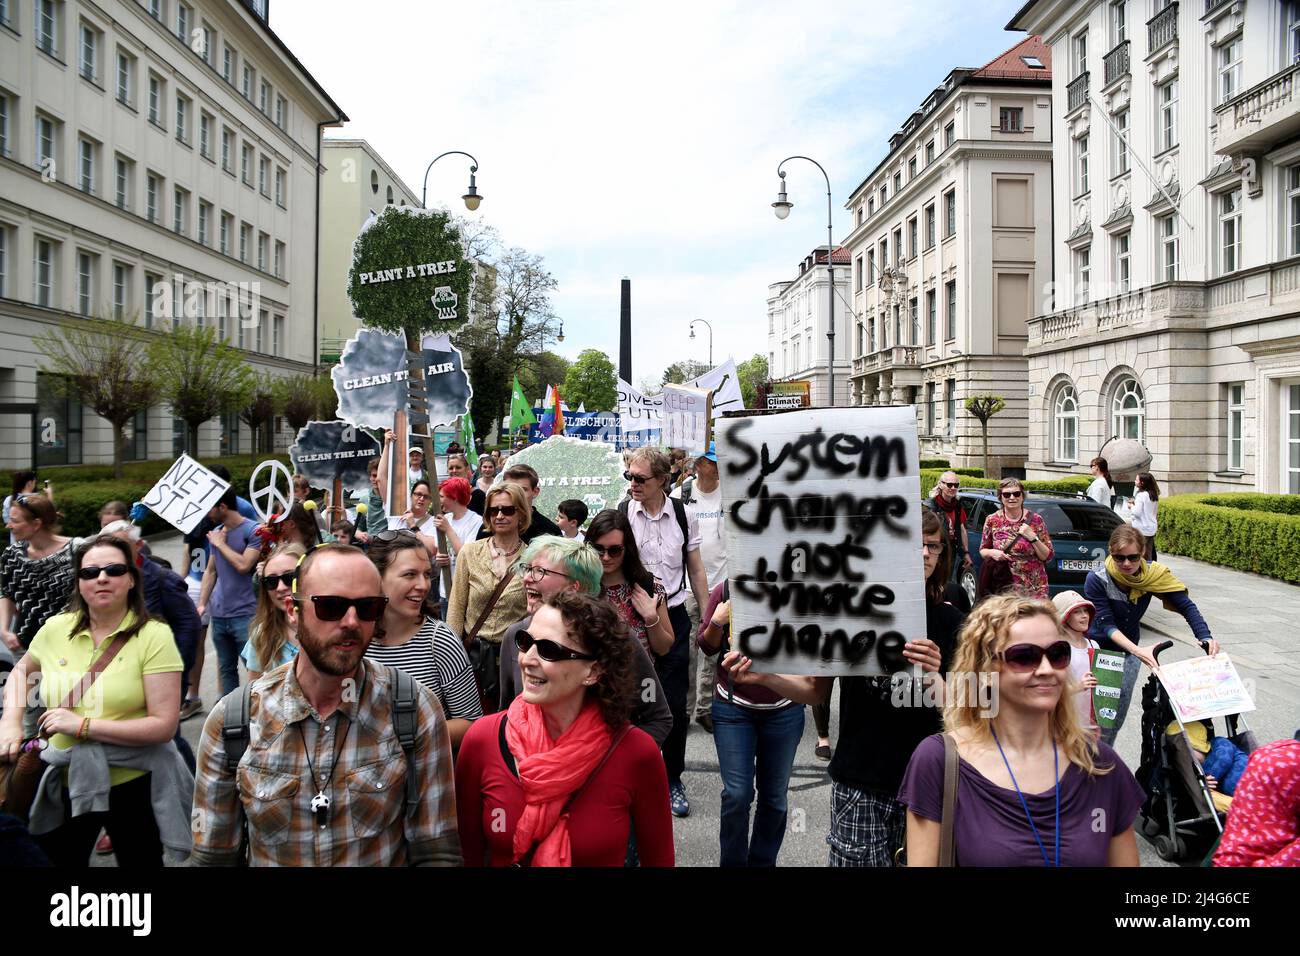 On May 6, 2017 hundreds joined the Climate march in Munich, Germany. They demanded effective measures against the climate crisis and climate justice. (Photo by Alexander Pohl/Sipa USA) Stock Photo